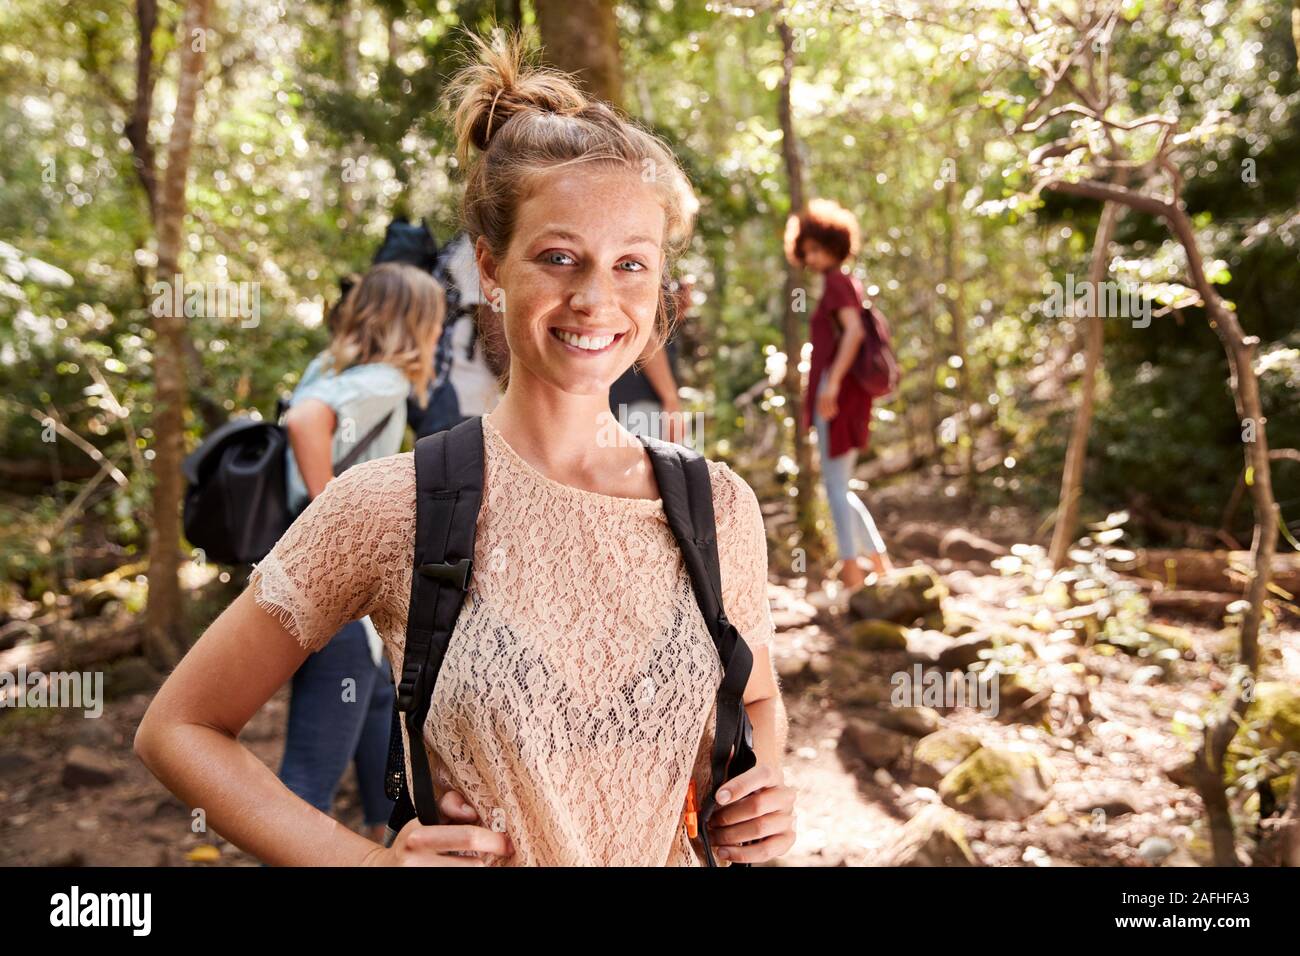 Portrait of millennial white woman with tied up hair hiking in a forest with her friends, close up Stock Photo